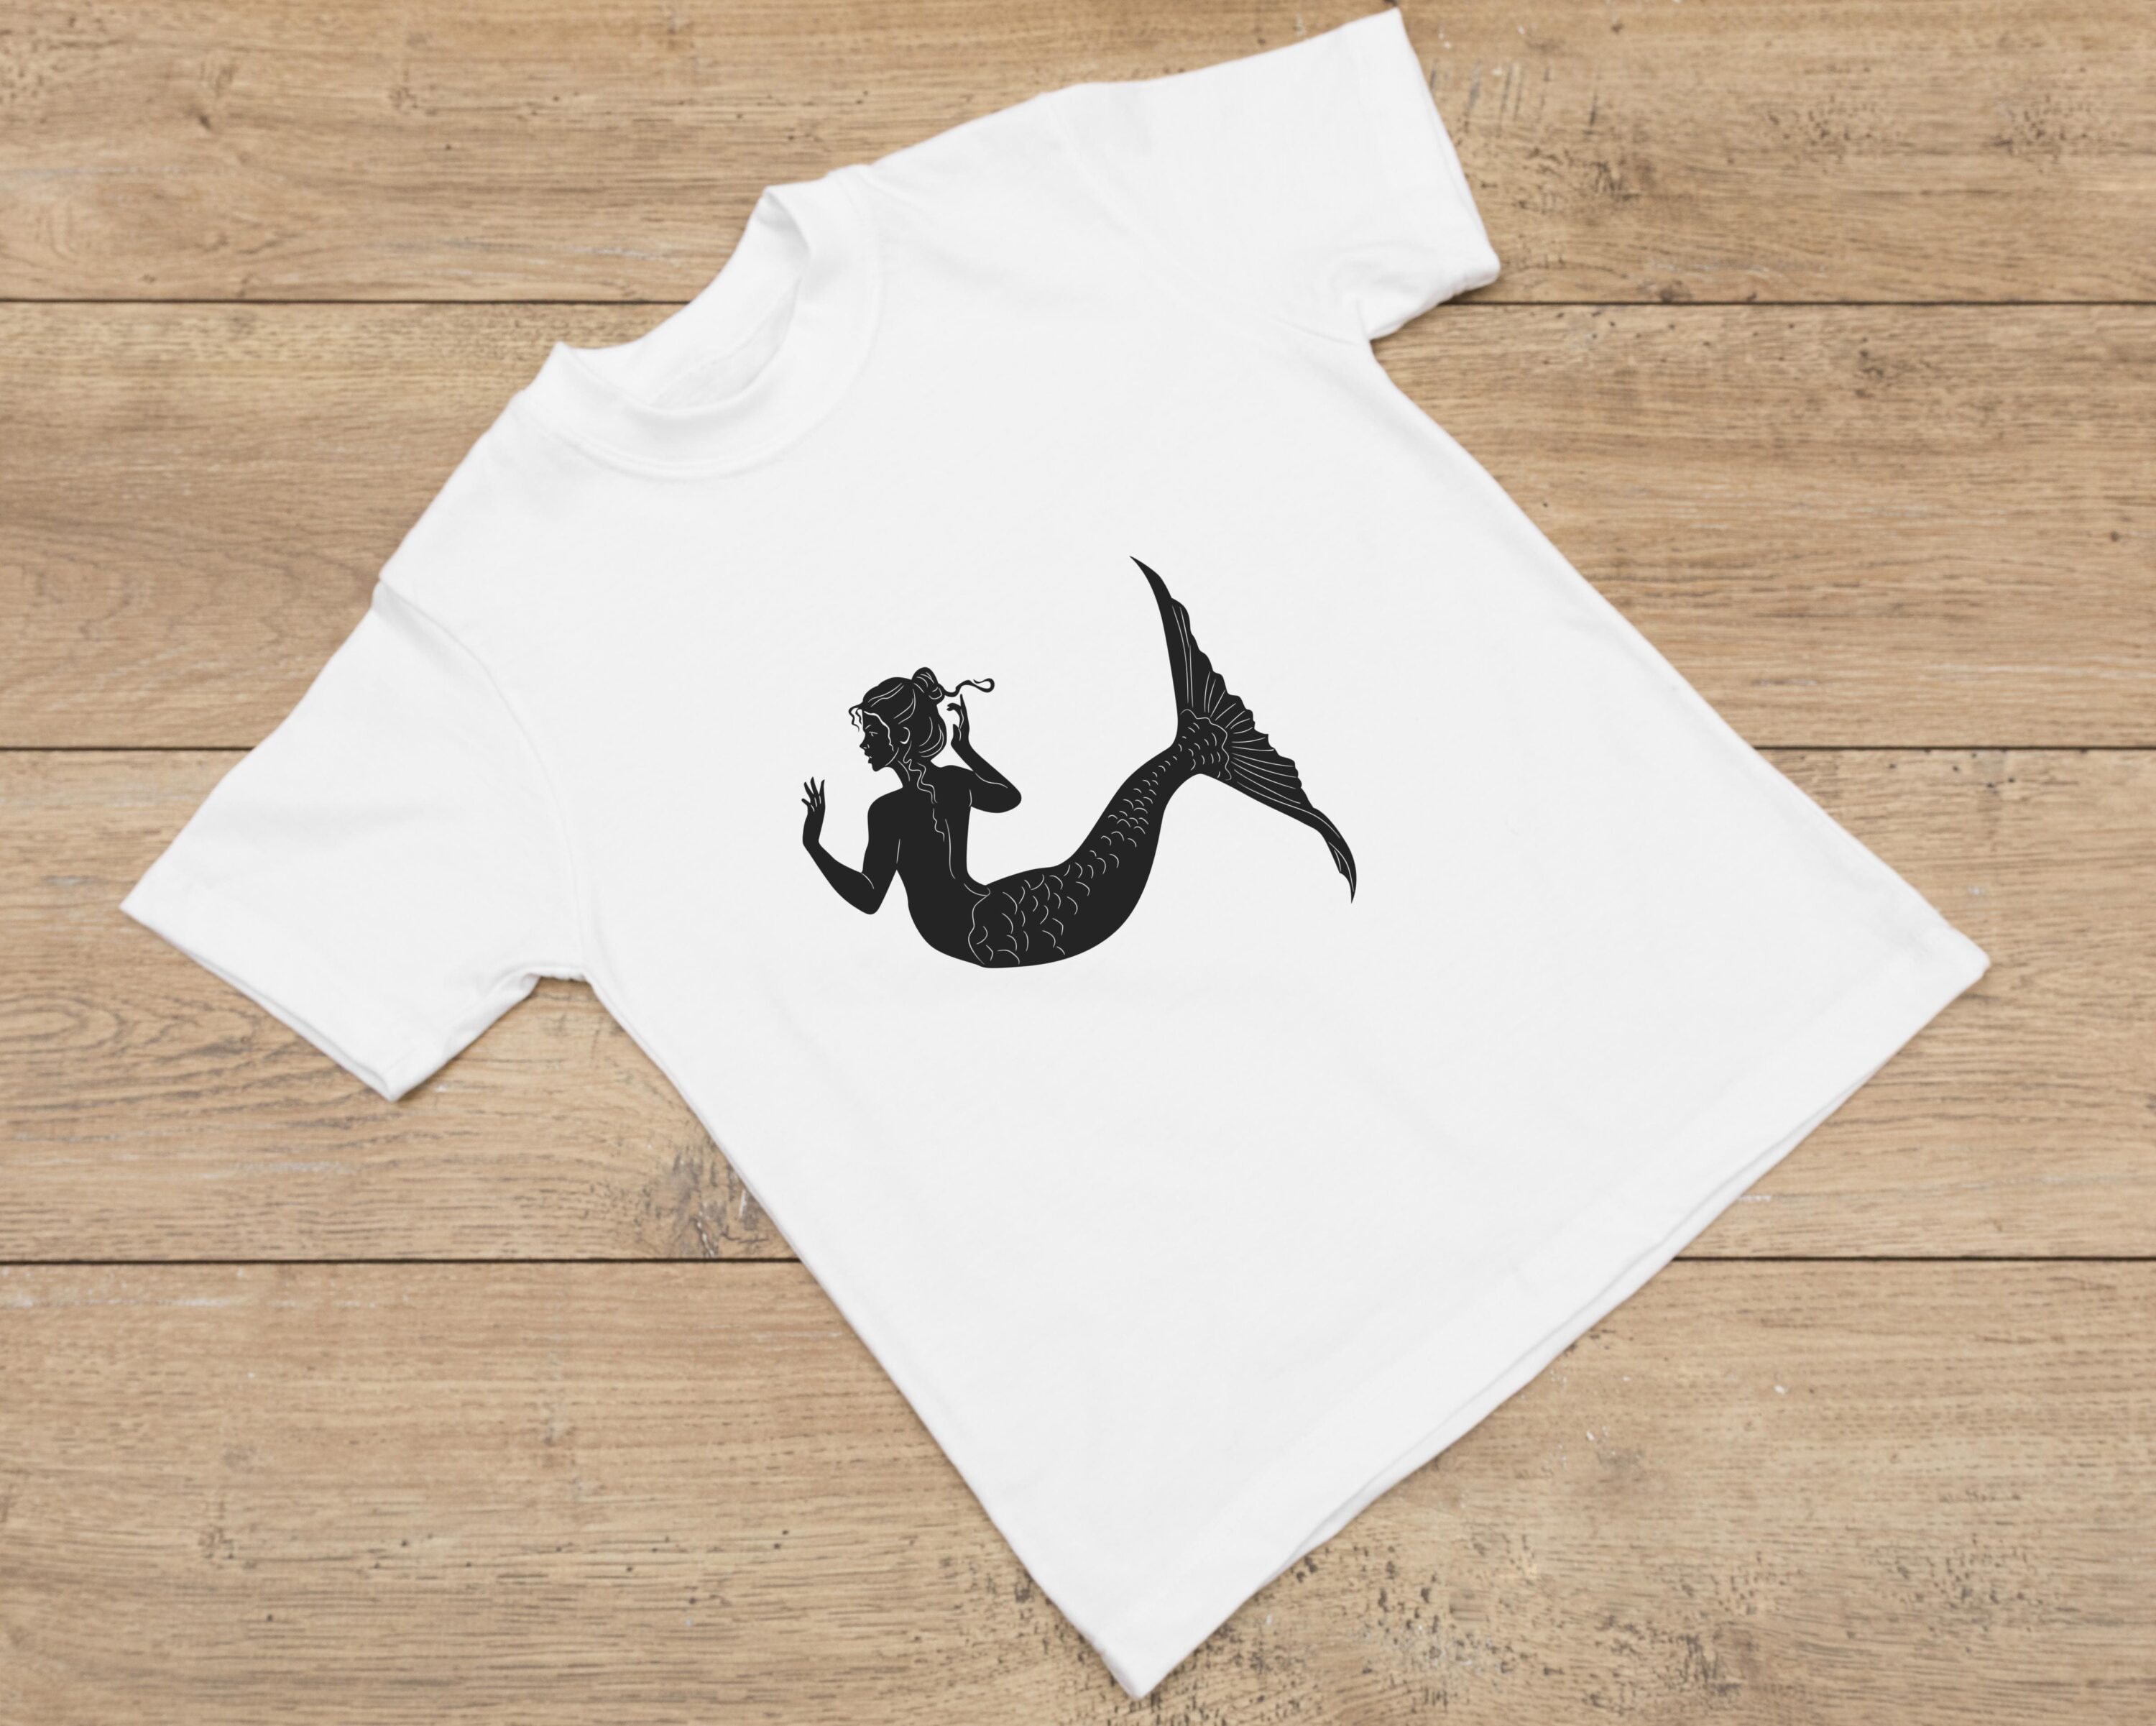 Narcissistic mermaid in a silhouette style.